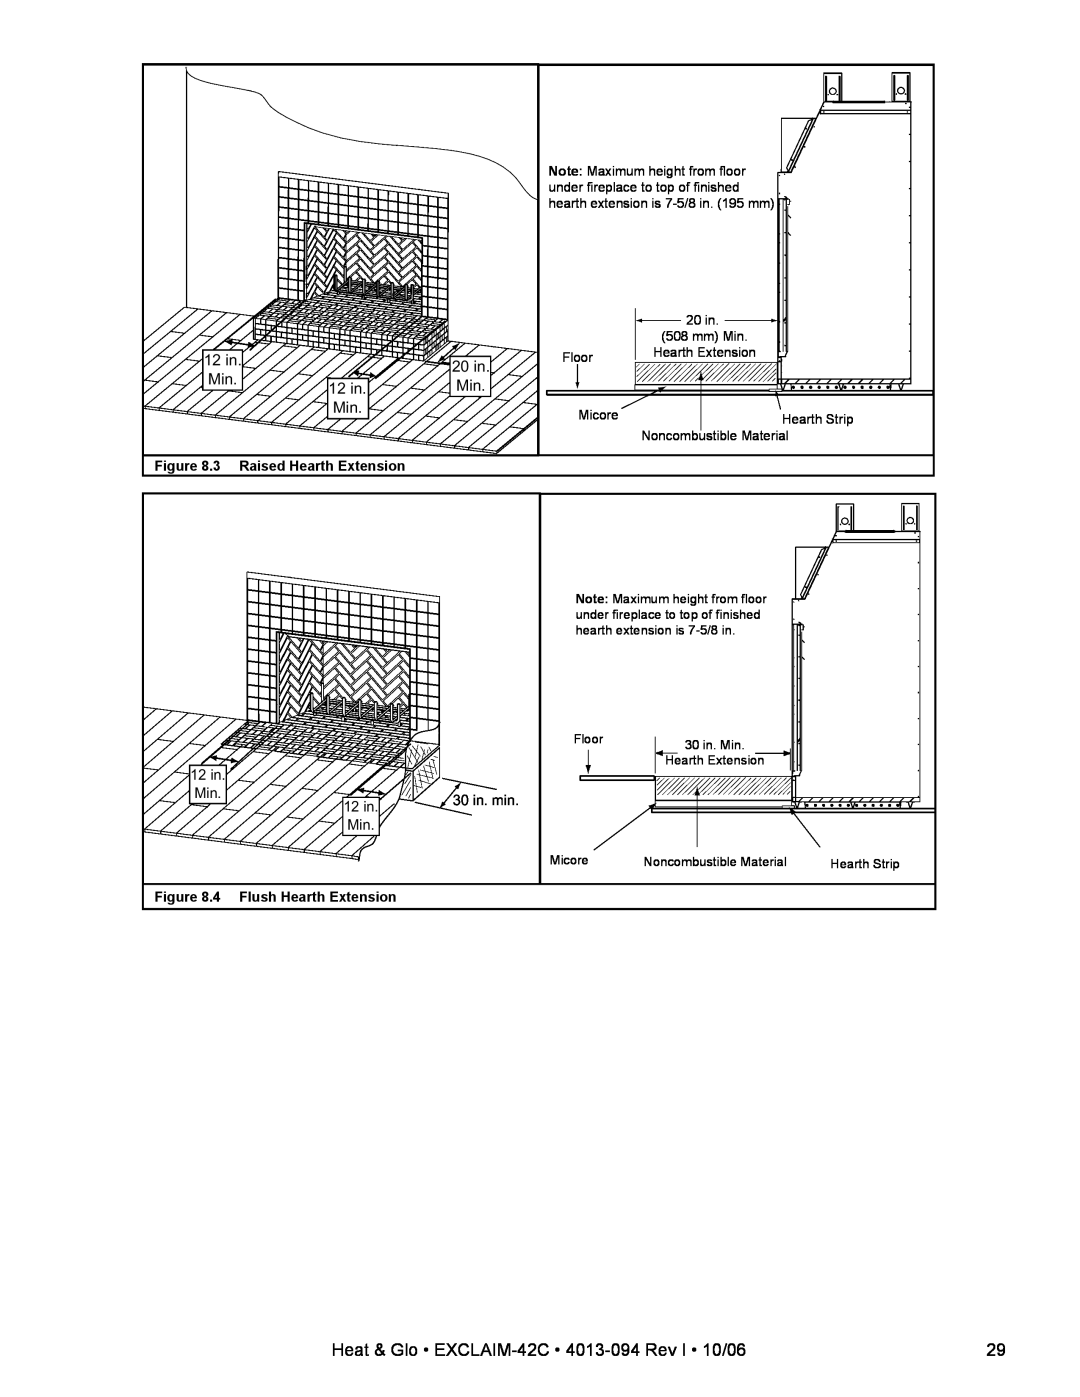 Heat & Glo LifeStyle EXCLAIM-42T-C owner manual 12in Min, 20 in. Min, 3 Raised Hearth Extension, 4 Flush Hearth Extension 